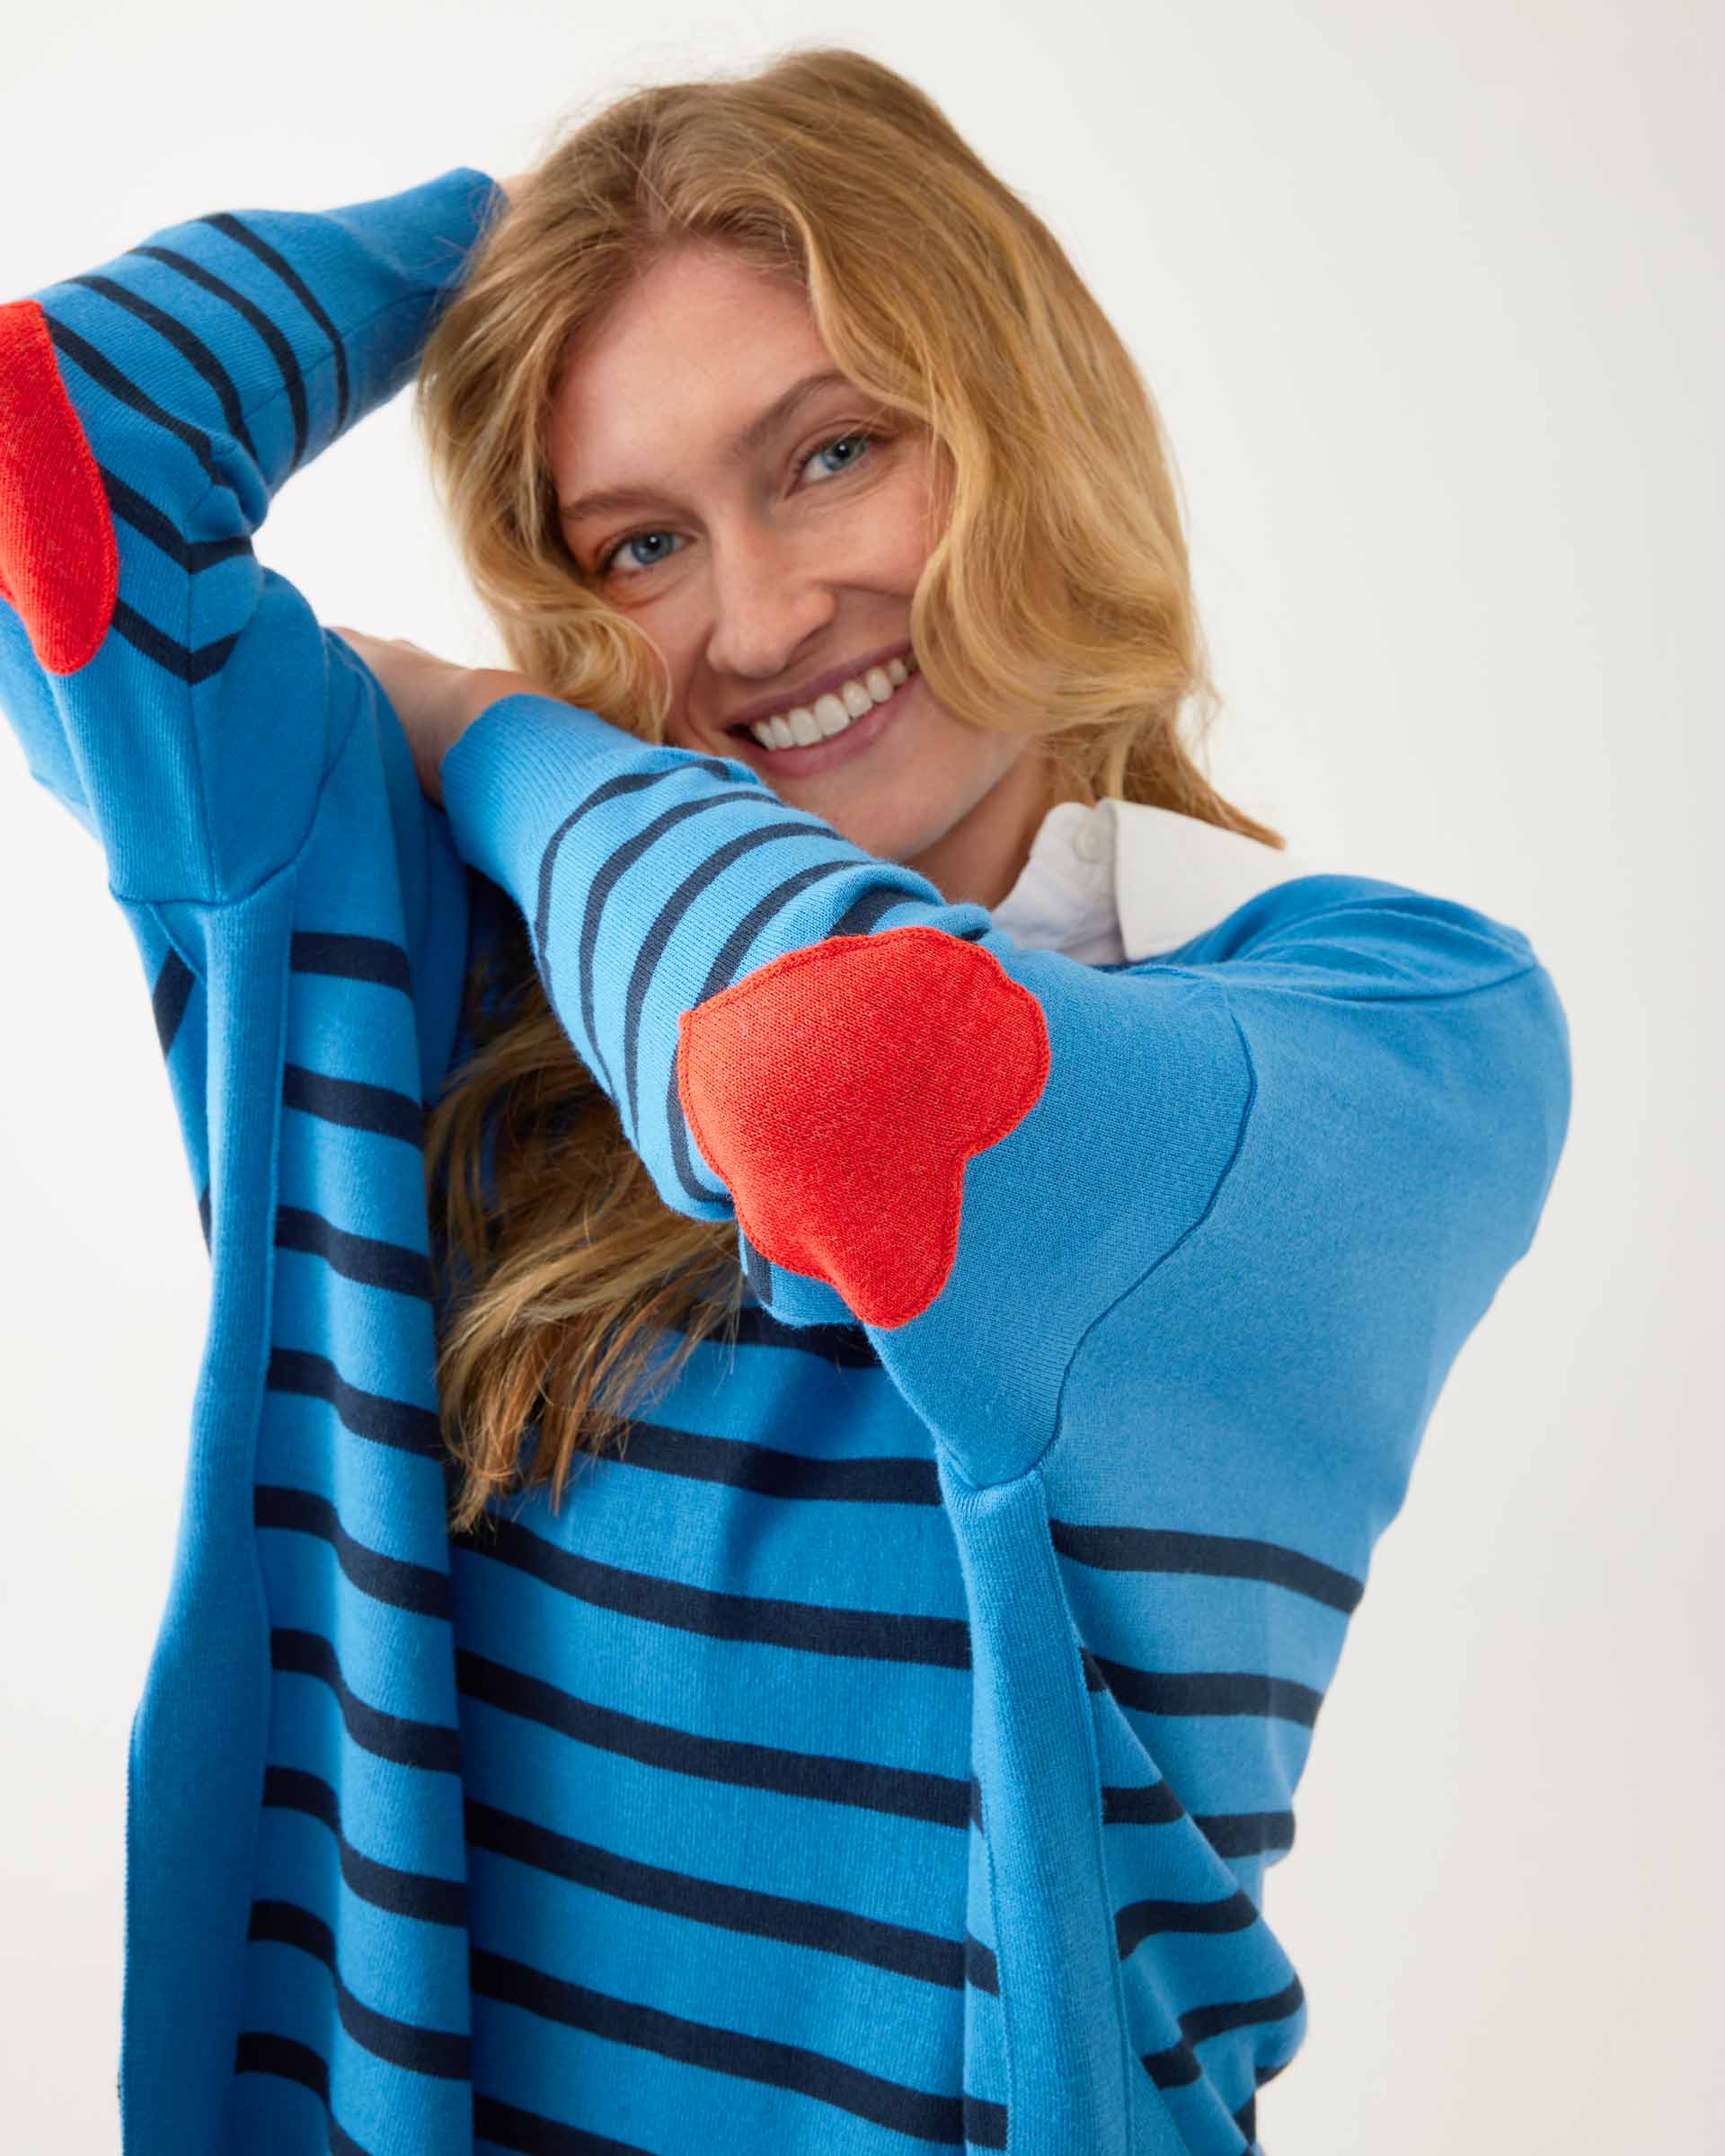 Sweatshirt with Shoulder Patches - Ready to Wear